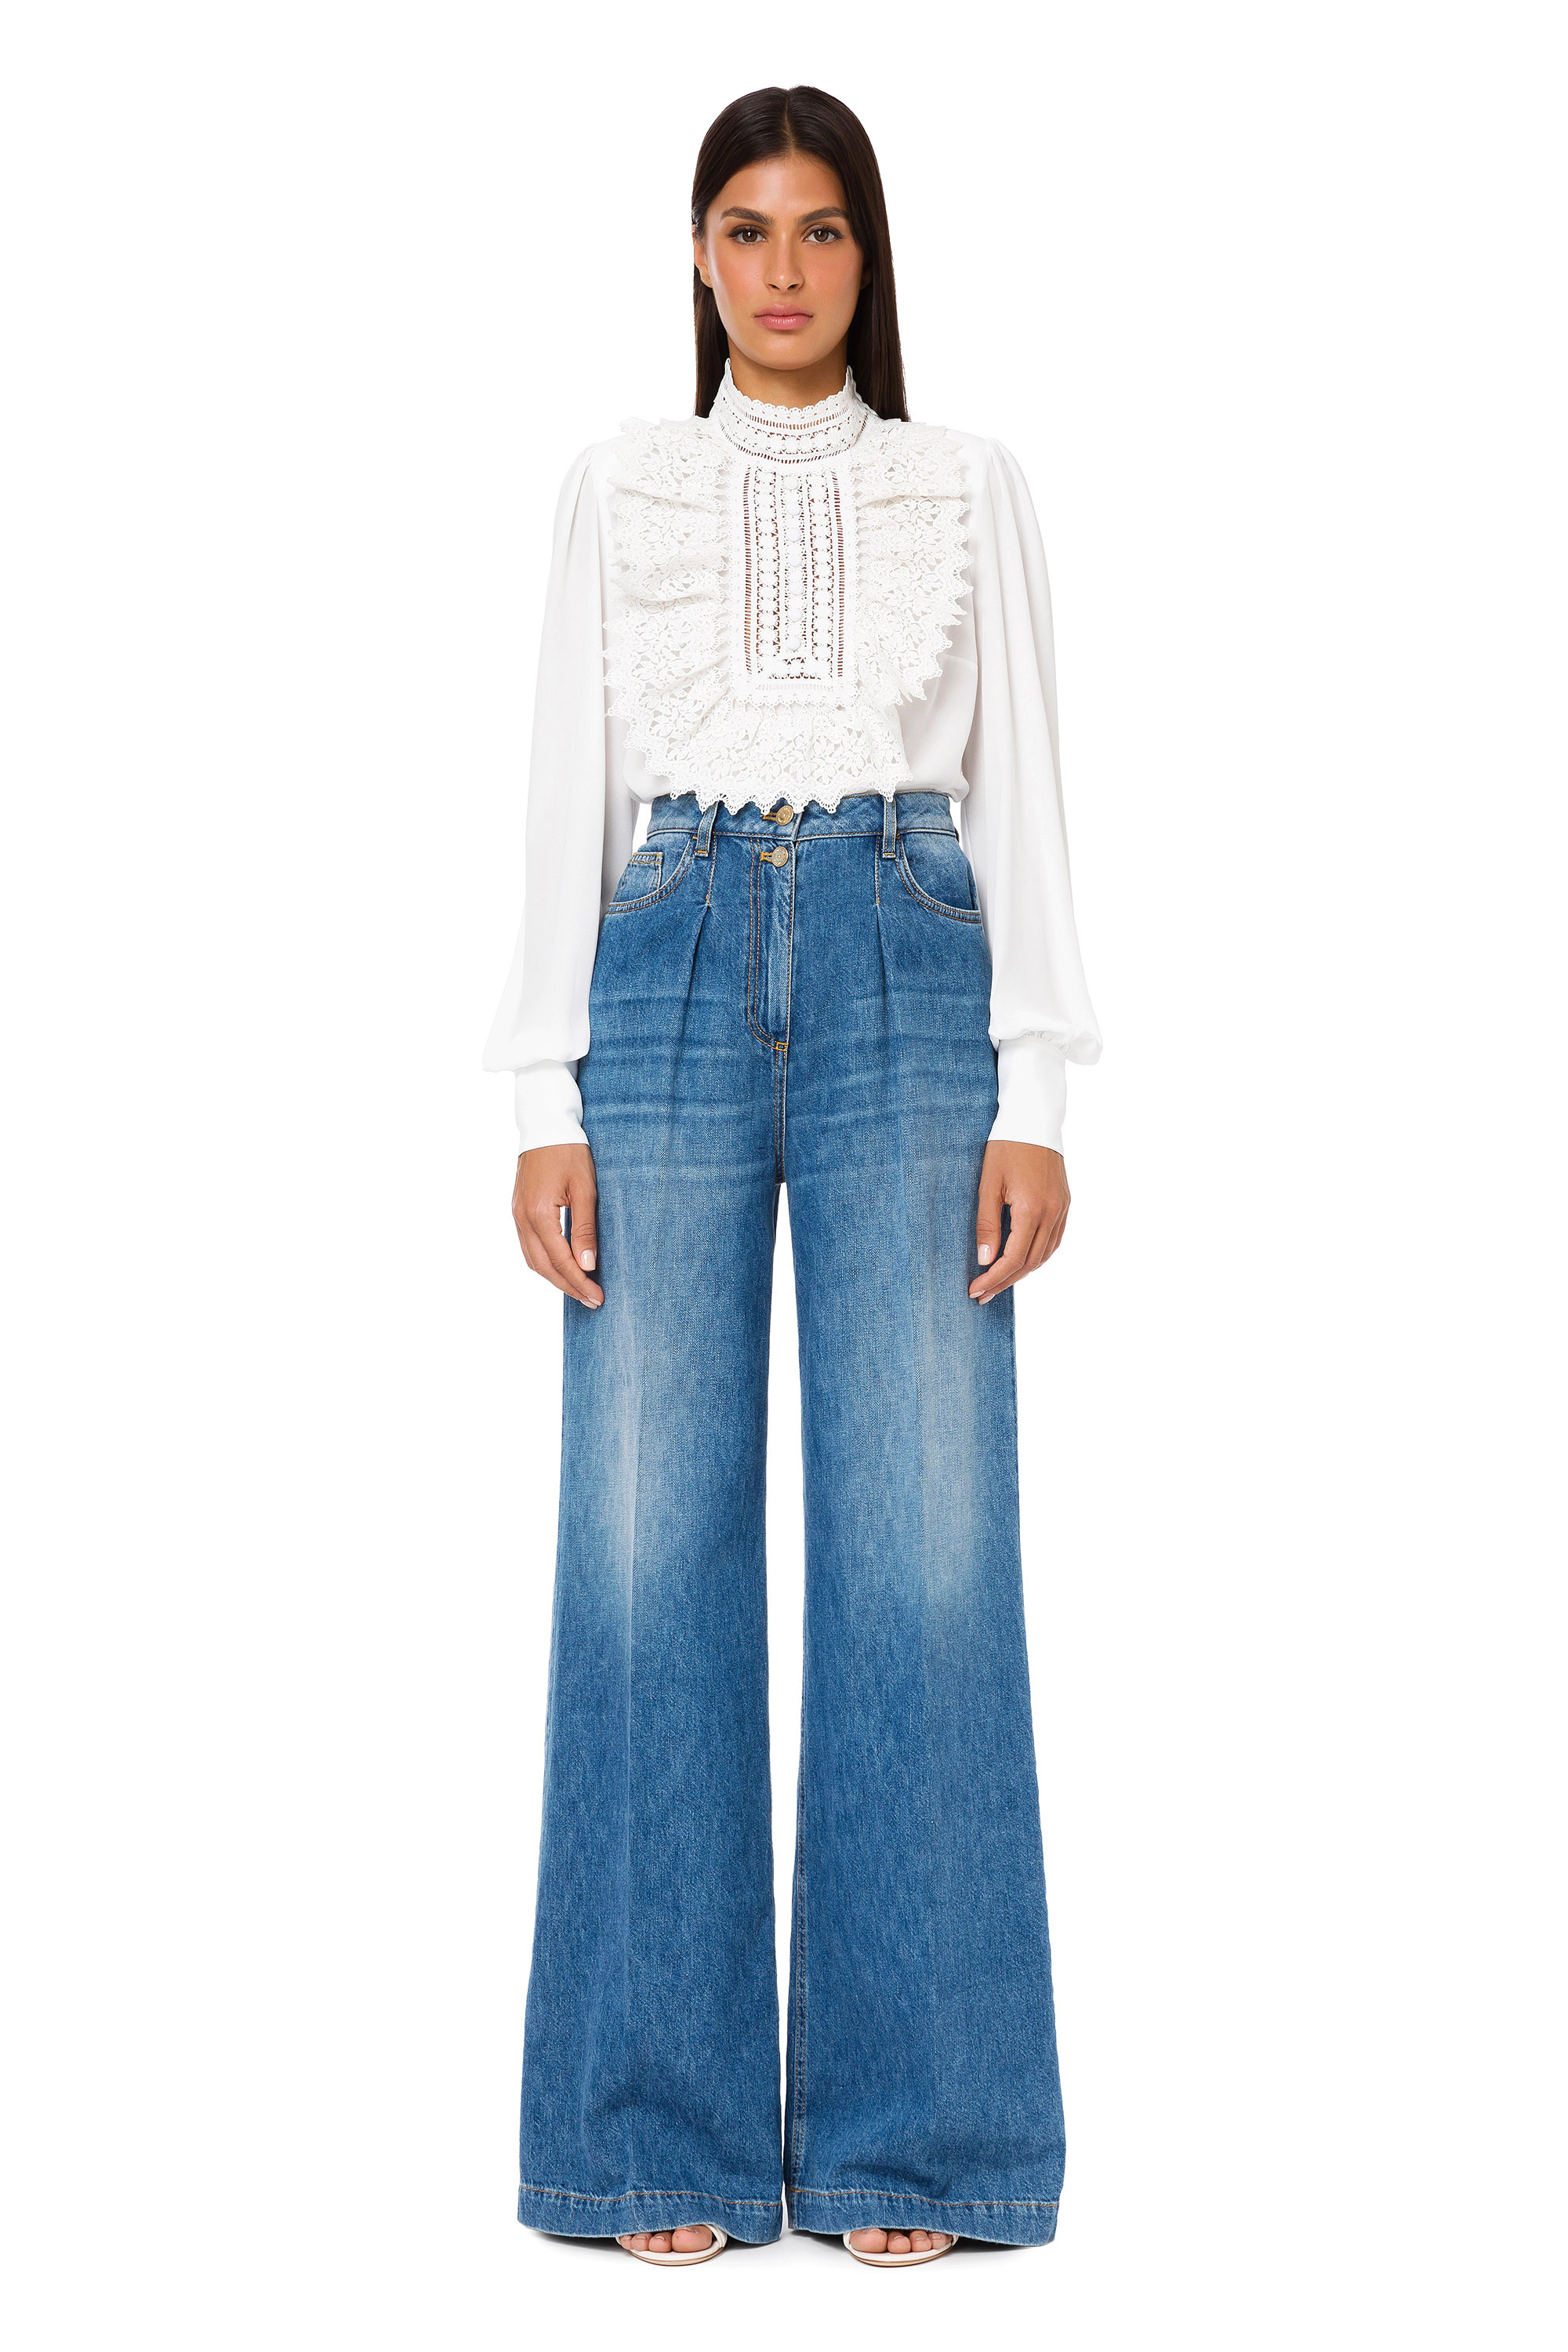 jeans with accessory | Elisabetta Franchi® Outlet